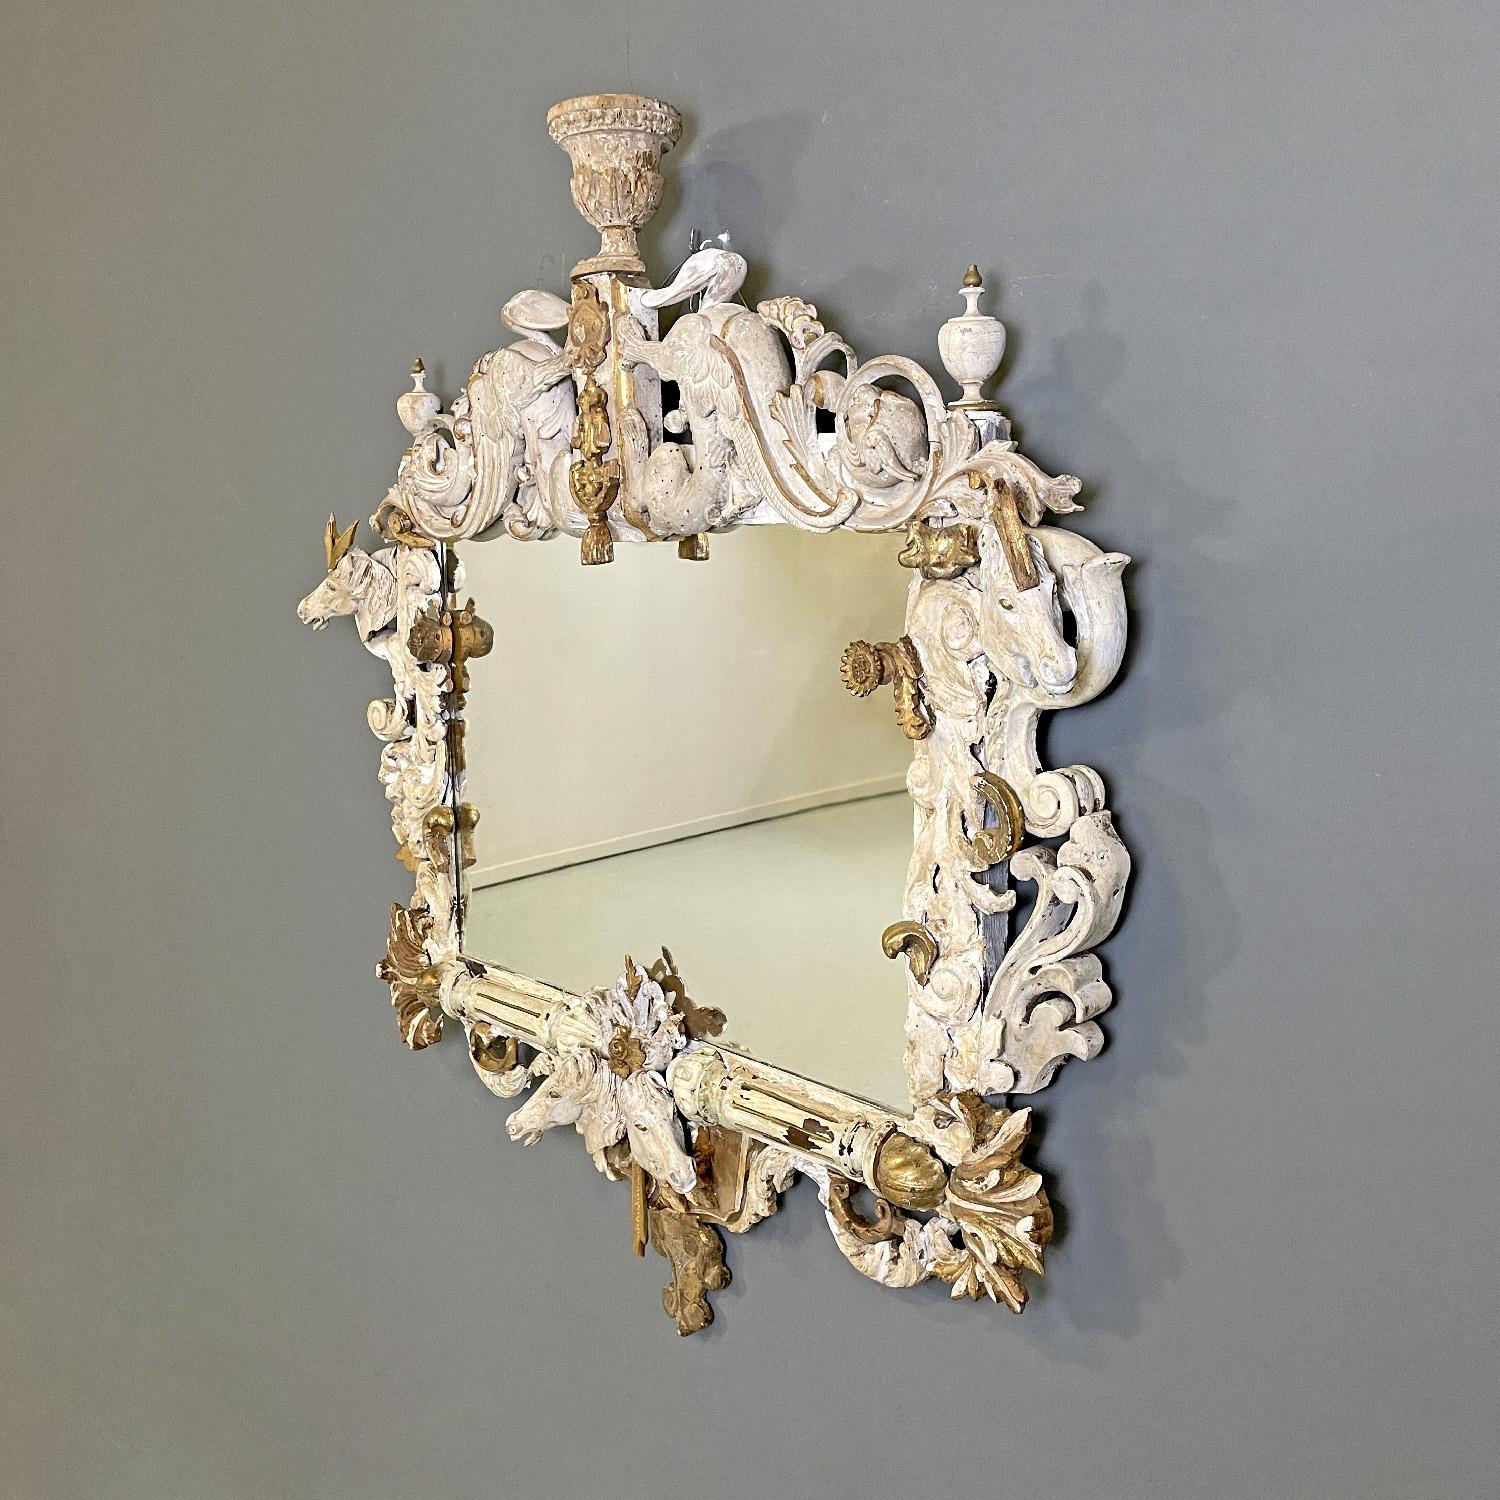 European Italian antique white and golden wood wall mirror with animal decorations, 1990s For Sale